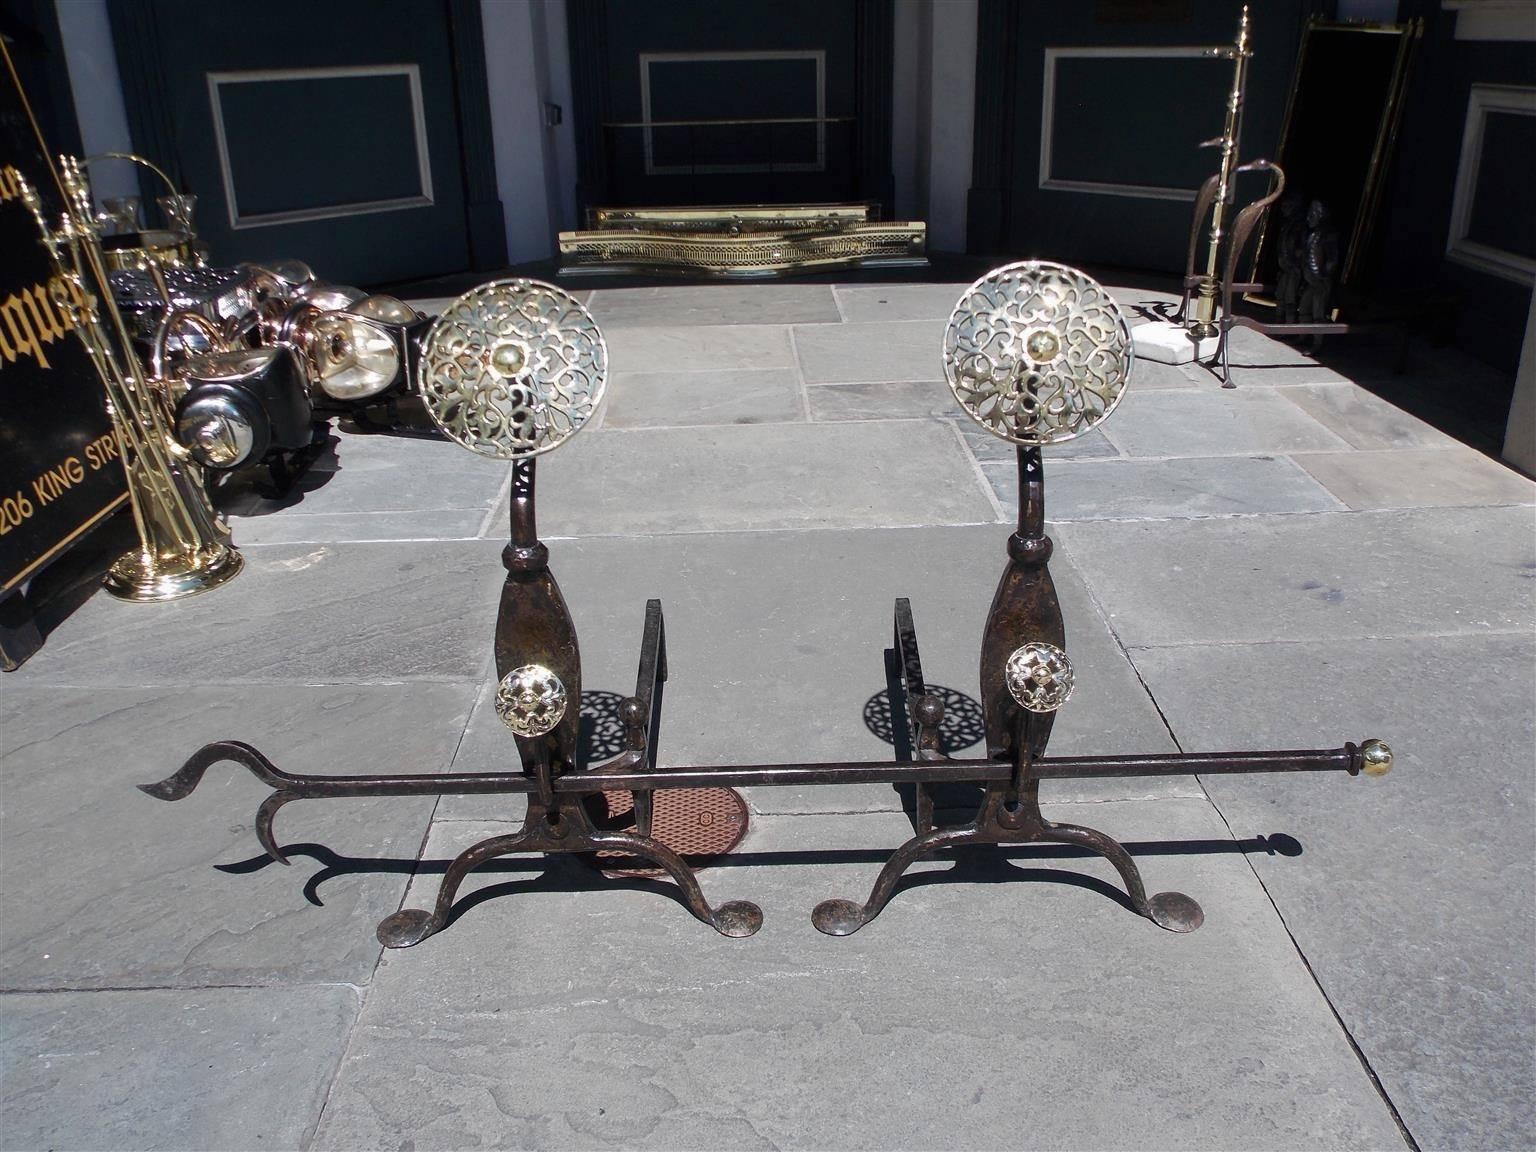 Pair of English brass and cast iron decorative floral double medallion andirons with molded plinths, spit hooks with poker, matching ball log stops, and terminating on scrolled legs with penny feet, Mid-19th century. Cast iron and brass ball top